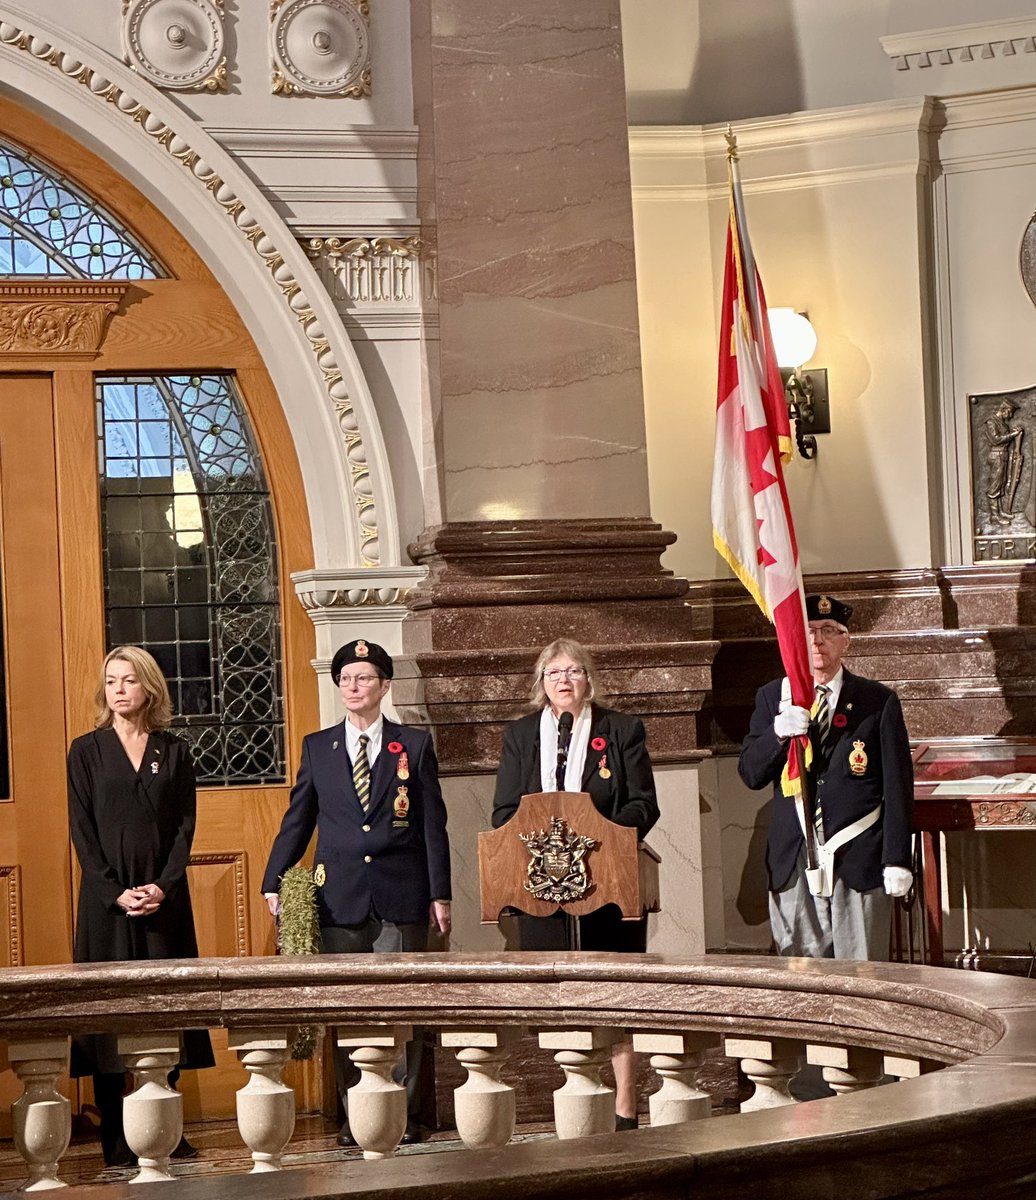 It was a honour to lay the wreath at the legislature today on behalf of Premier Eby. Thank you to Rev Fran Dearman for your powerful words of reflection and to the beautiful voices of the Newcombe singers conducted by Kathryn Whitney.